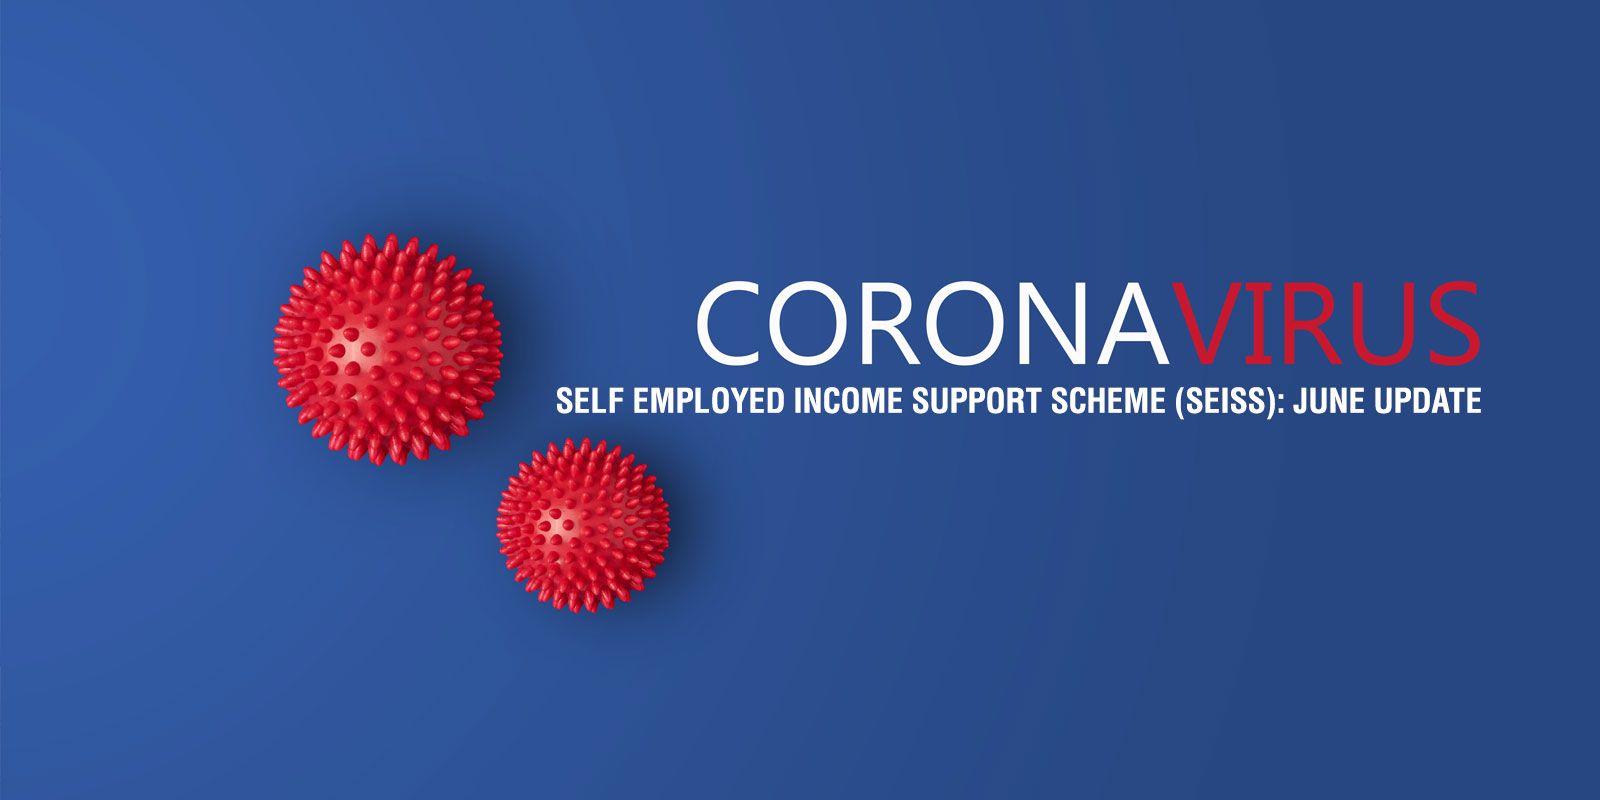 Self Employed Income Support Scheme (SEISS): June Update